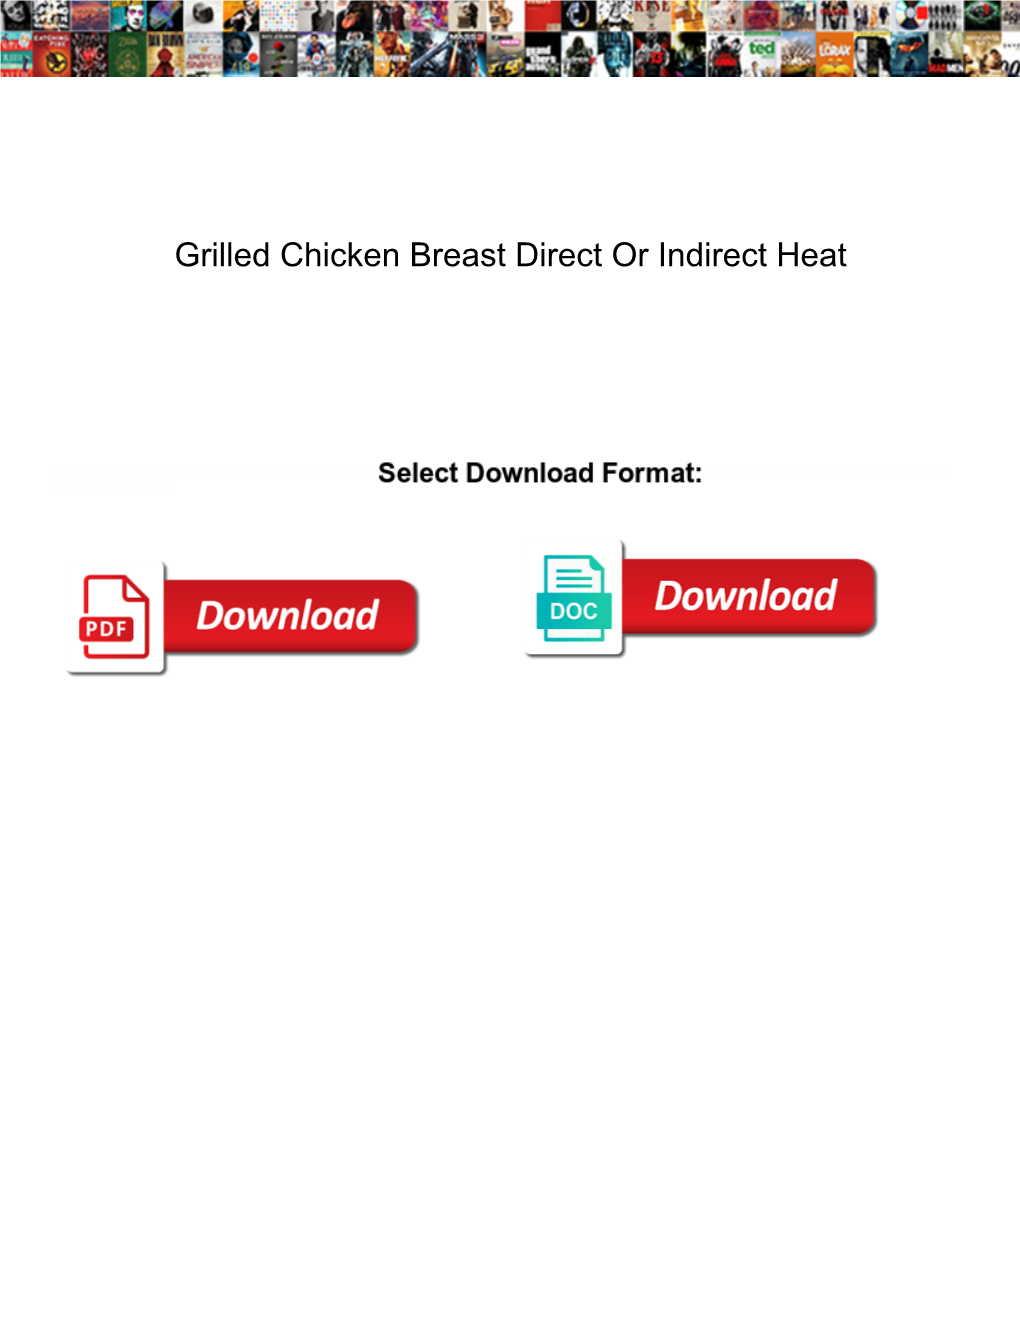 Grilled Chicken Breast Direct Or Indirect Heat